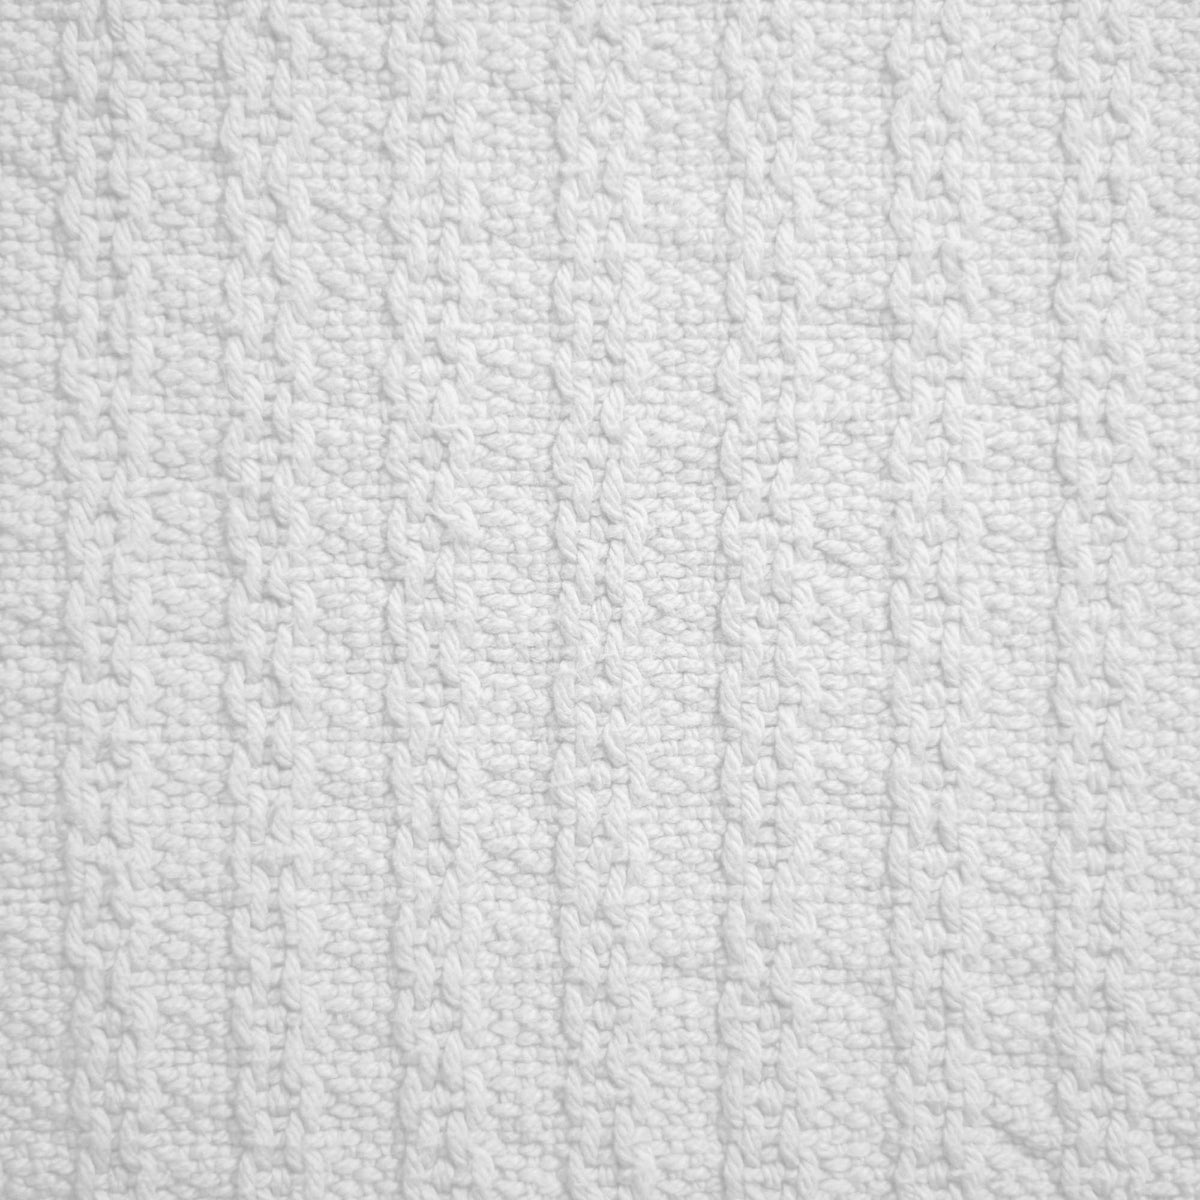 Cotton Baby Blanket - Cable Weave - White - American Blanket Company